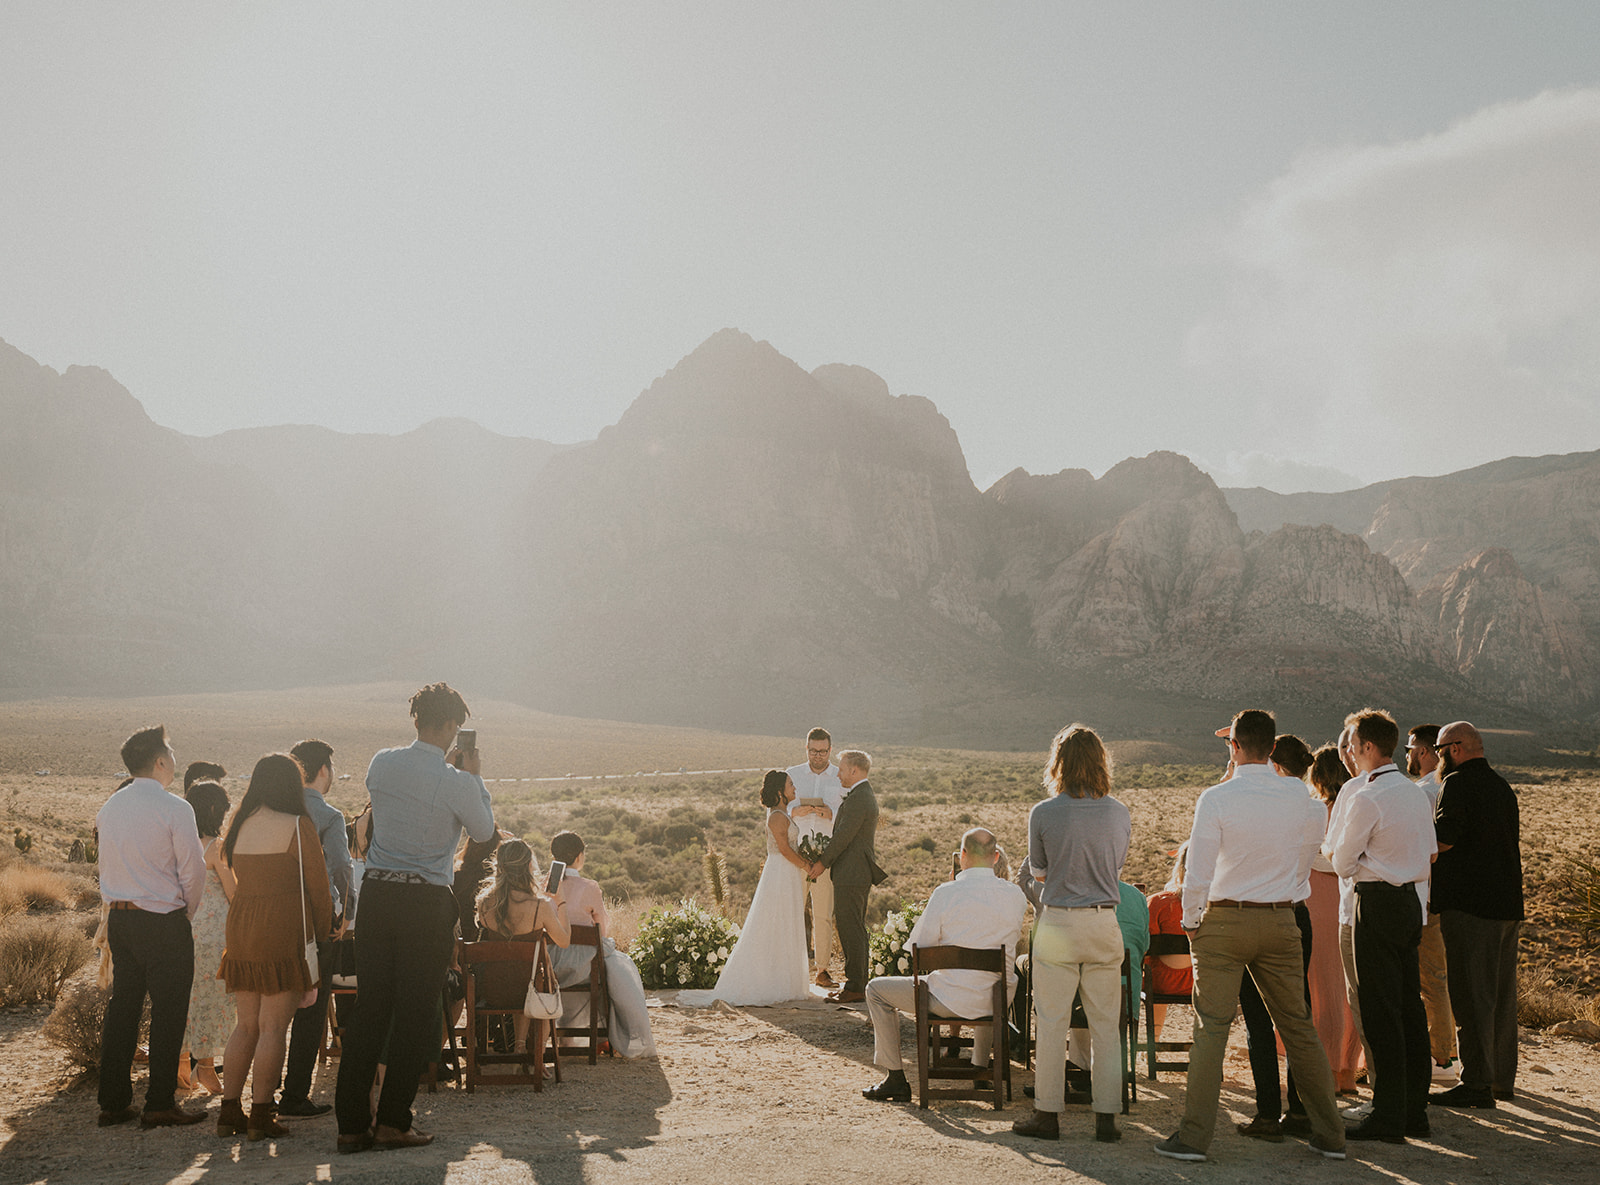 A micro wedding at the Red Rock Canyon Overlook, just outside of Las Vegas